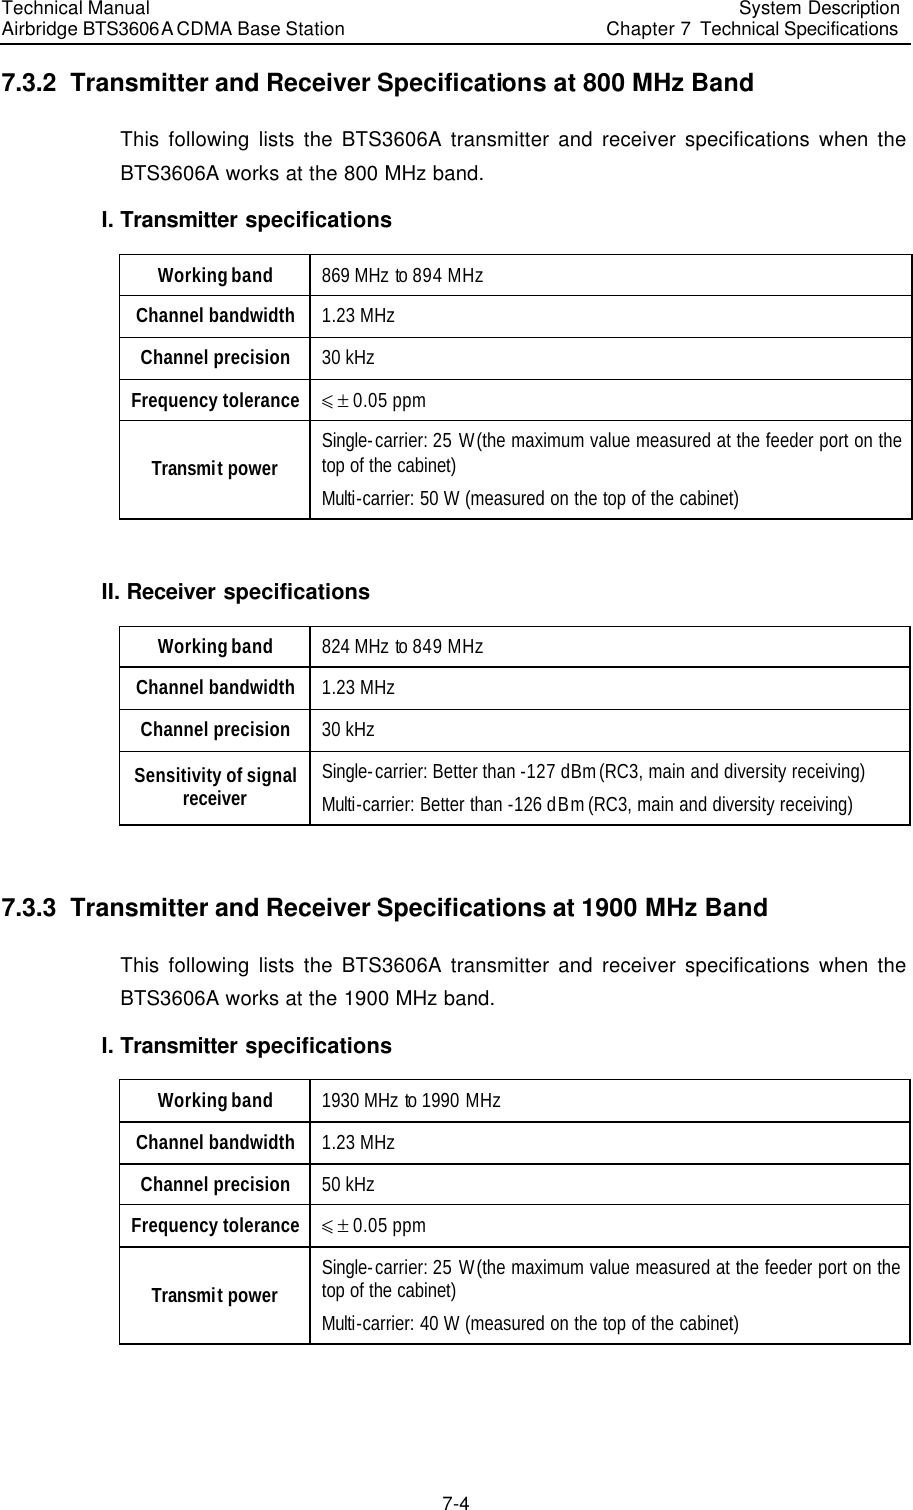 Technical Manual Airbridge BTS3606A CDMA Base Station System Description Chapter 7  Technical Specifications   7-4 7.3.2  Transmitter and Receiver Specifications at 800 MHz Band This following lists the BTS3606A transmitter and receiver specifications when the BTS3606A works at the 800 MHz band. I. Transmitter specifications Working band 869 MHz to 894 MHz Channel bandwidth 1.23 MHz Channel precision 30 kHz Frequency tolerance Ÿ ! 0.05 ppm Transmit power Single-carrier: 25 W (the maximum value measured at the feeder port on the top of the cabinet) Multi-carrier: 50 W (measured on the top of the cabinet)  II. Receiver specifications Working band 824 MHz to 849 MHz Channel bandwidth 1.23 MHz Channel precision 30 kHz Sensitivity of signal receiver Single-carrier: Better than -127 dBm (RC3, main and diversity receiving) Multi-carrier: Better than -126 dBm (RC3, main and diversity receiving)  7.3.3  Transmitter and Receiver Specifications at 1900 MHz Band This following lists the BTS3606A transmitter and receiver specifications when the BTS3606A works at the 1900 MHz band. I. Transmitter specifications Working band 1930 MHz to 1990 MHz Channel bandwidth 1.23 MHz Channel precision 50 kHz Frequency tolerance Ÿ ! 0.05 ppm Transmit power Single-carrier: 25 W (the maximum value measured at the feeder port on the top of the cabinet) Multi-carrier: 40 W (measured on the top of the cabinet)  